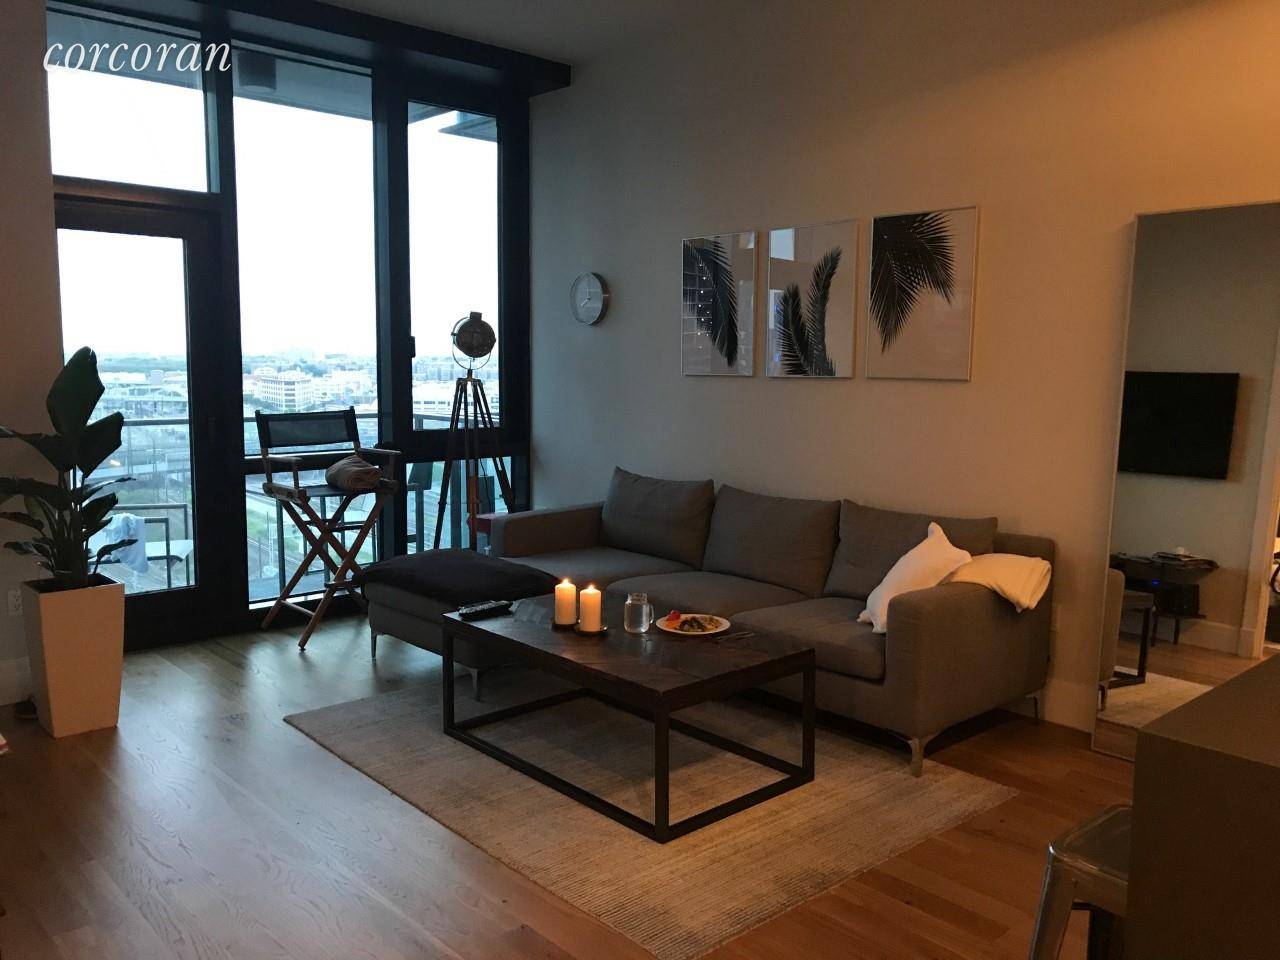 Introducing a great opportunity to lease a high floor one bedroom in an amenity rich Long Island City building.